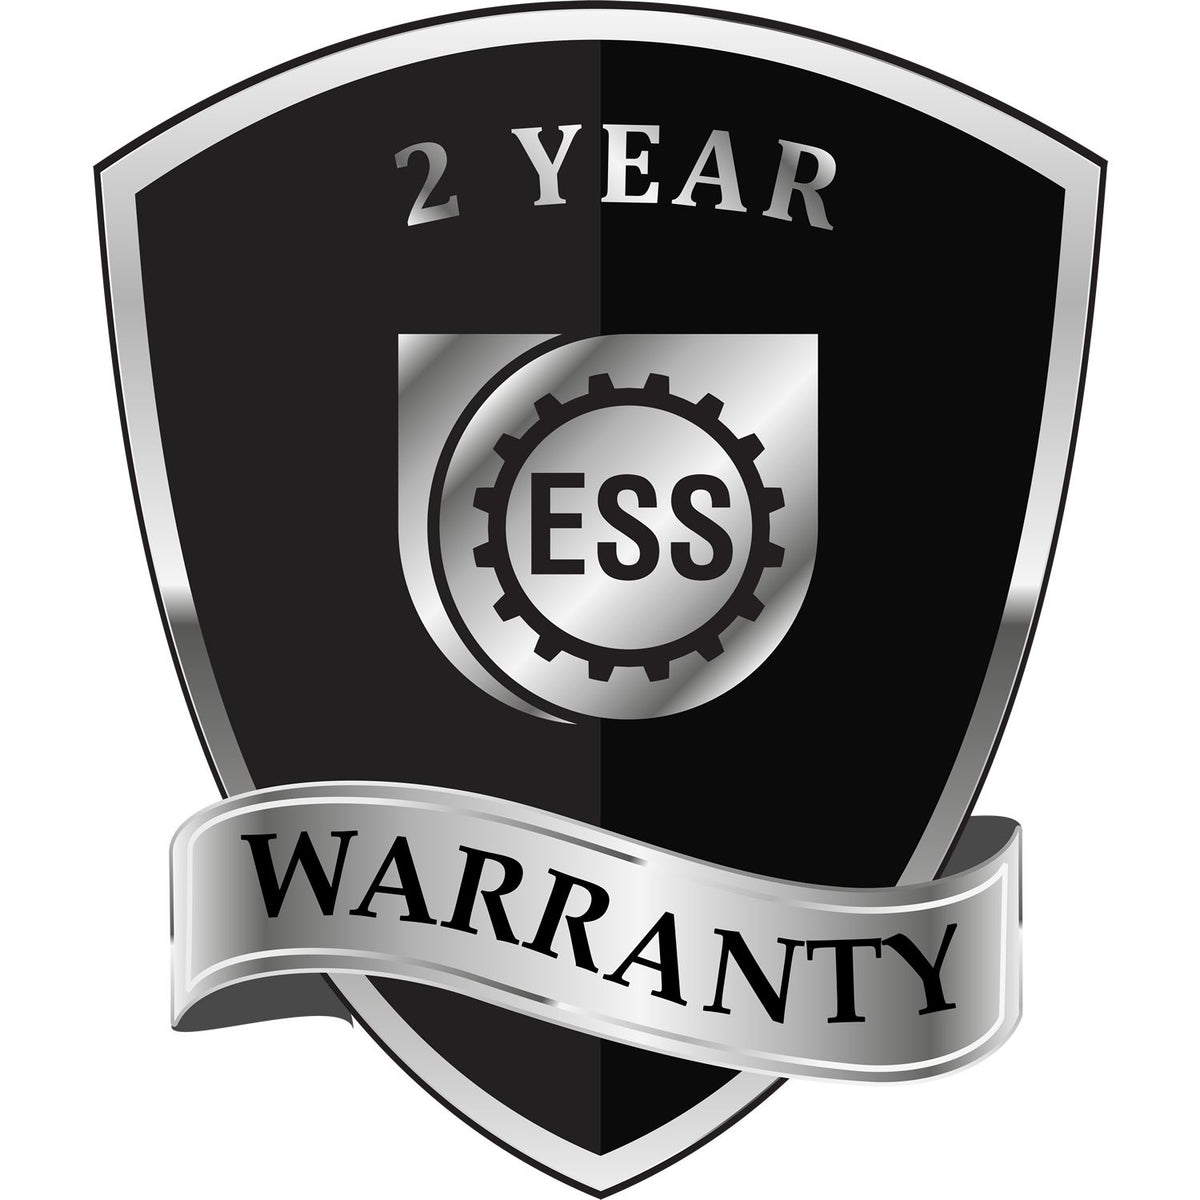 A black and silver badge or emblem showing warranty information for the Gift Wyoming Landscape Architect Seal